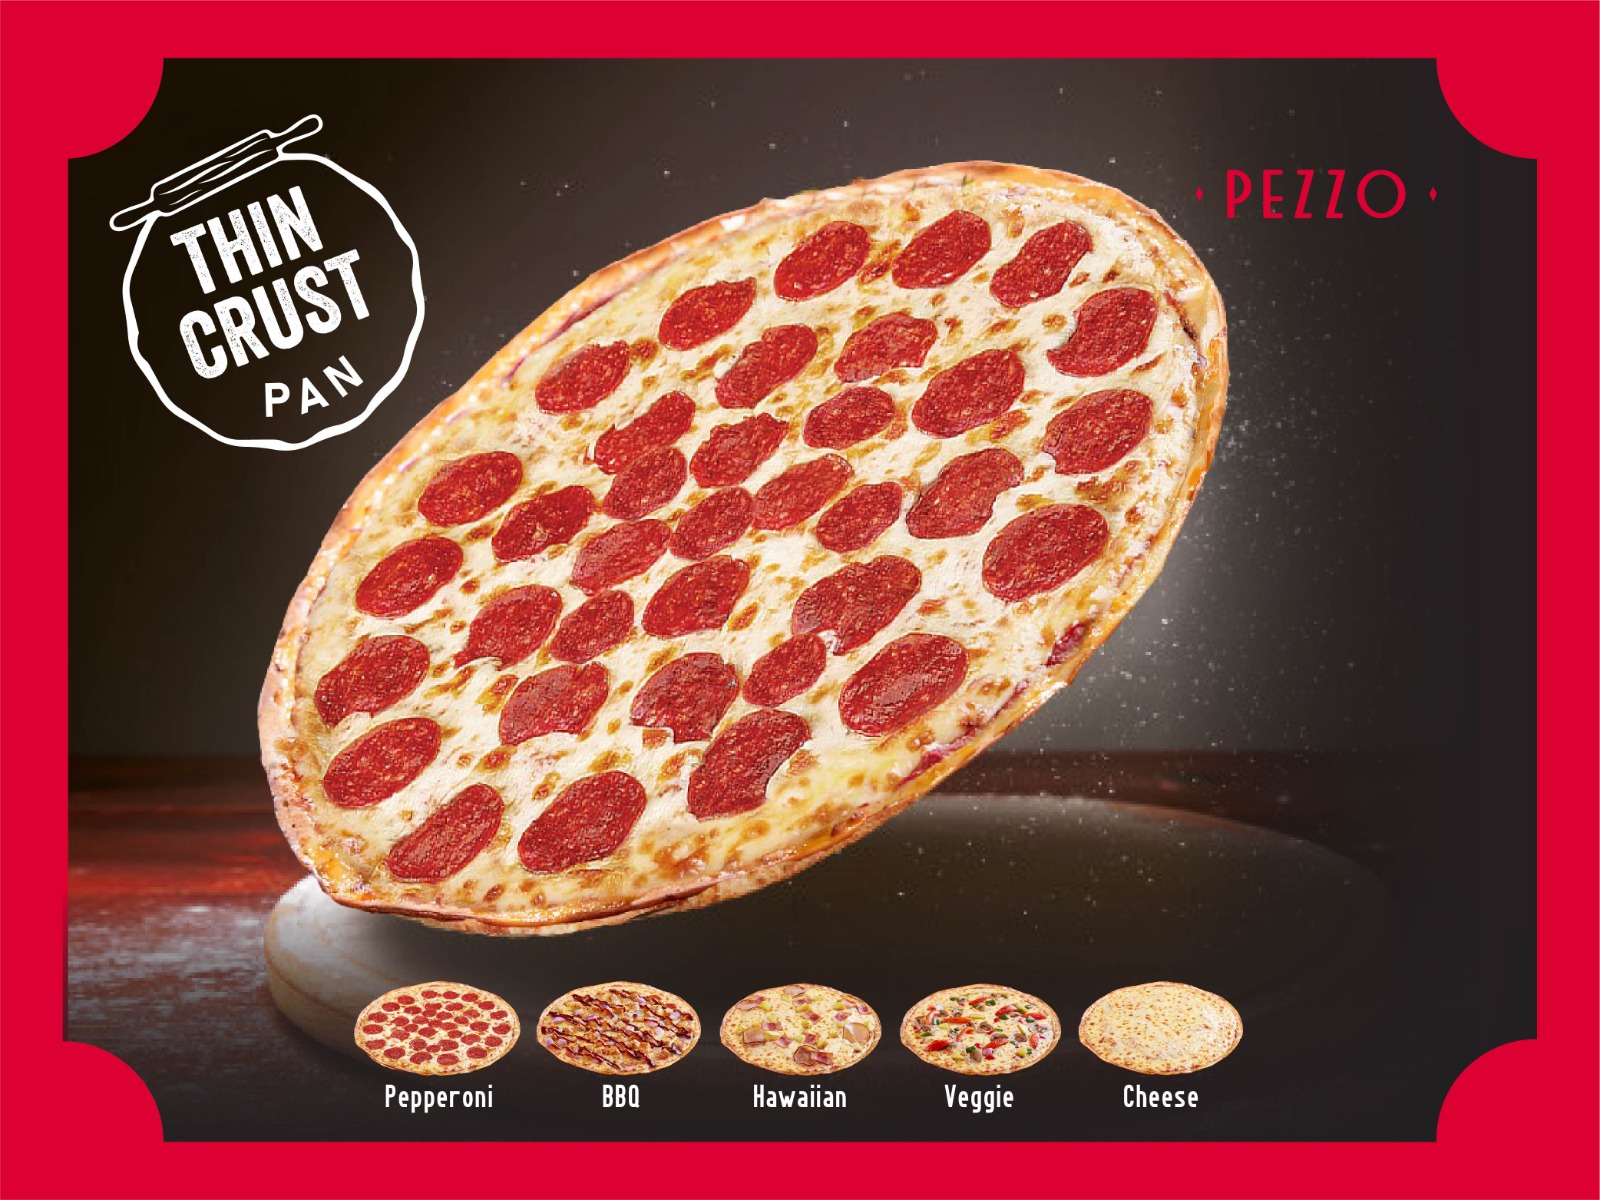 1 x 13 Thin Crust Pizza Pan [Exclusive Deal] at Pezzo - Get Deals, Cashback and Rewards with ShopBack GO